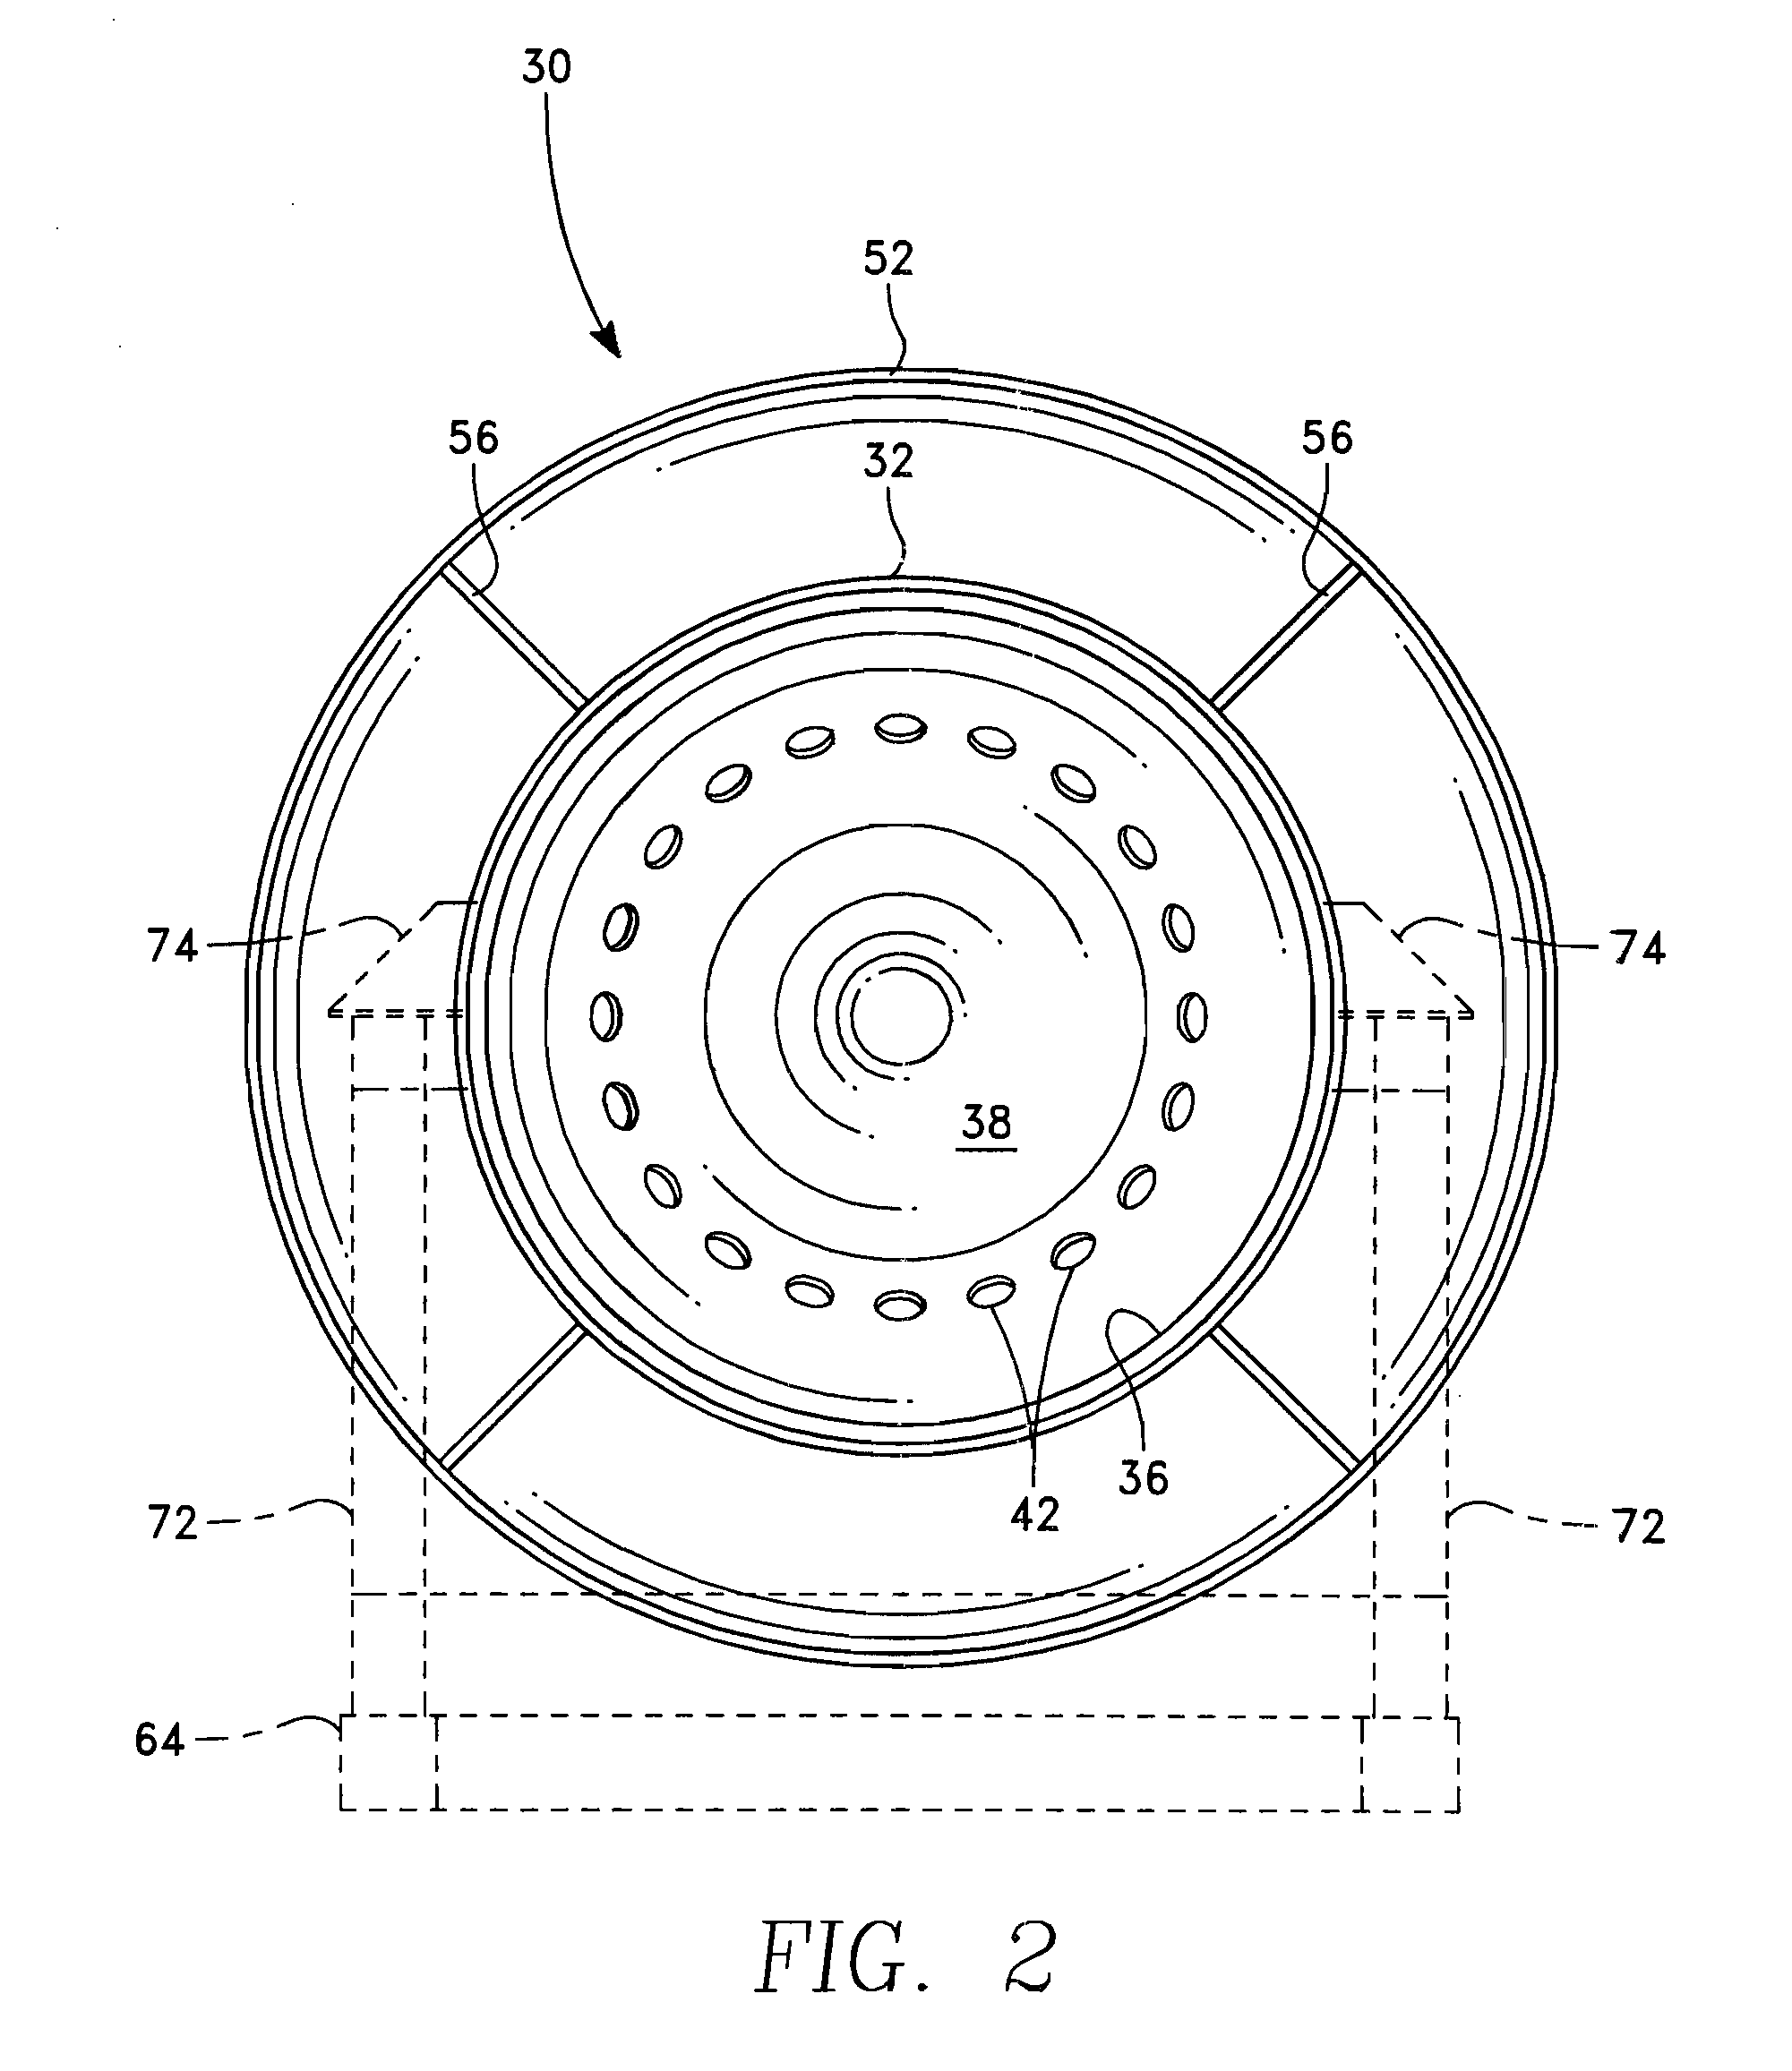 Noise attenuation device for reducing jet engine noise during testing